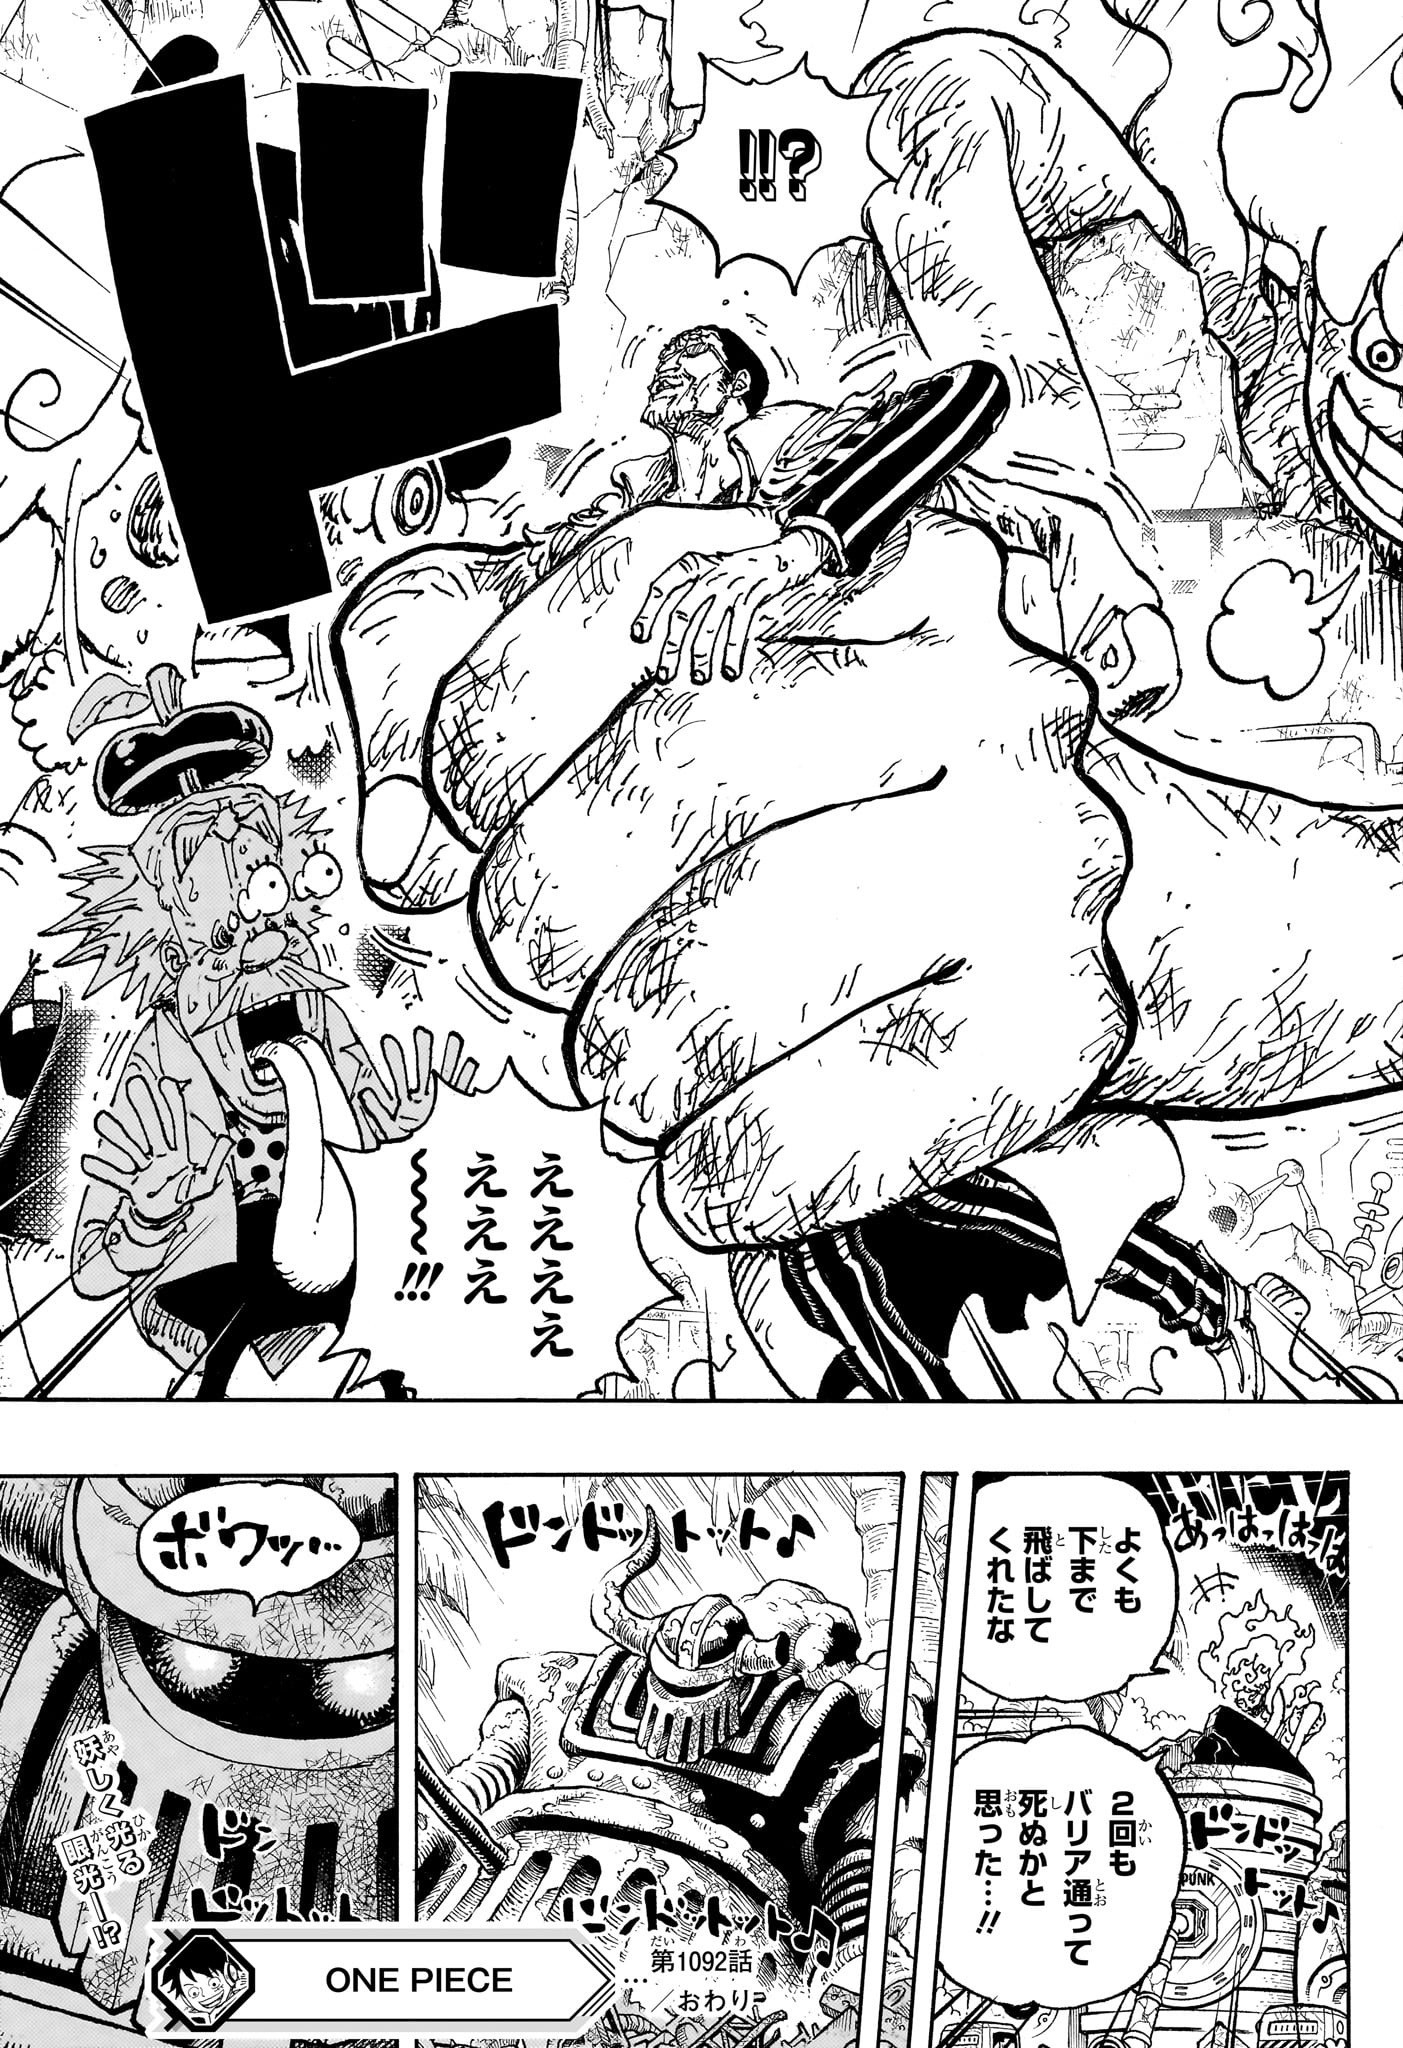 One Piece - Chapter 1092 - Page 17